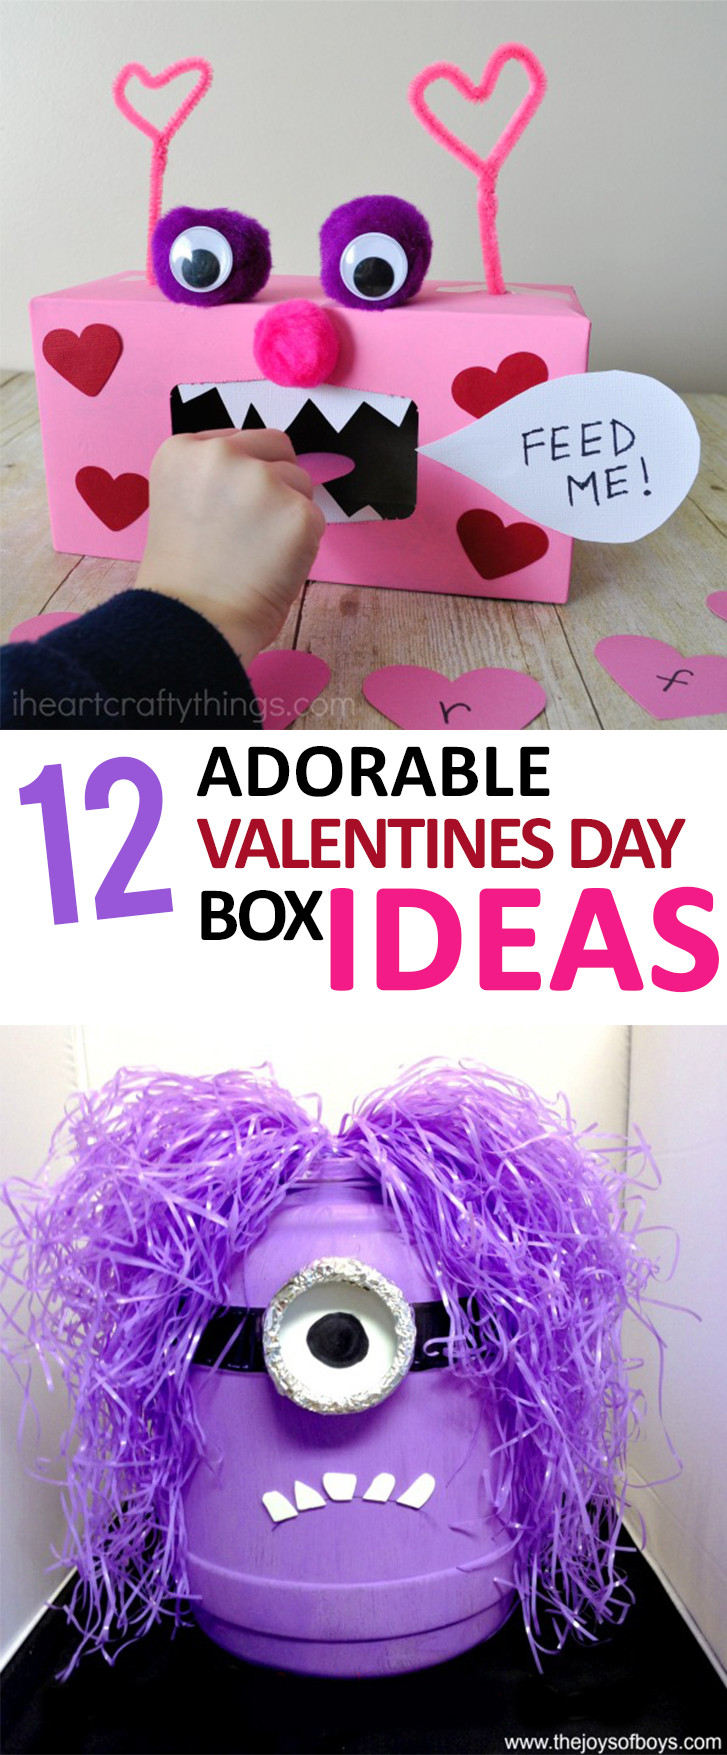 Valentines Day Box Ideas For Boys
 12 Adorable Valentines Day Box Ideas – Sunlit Spaces